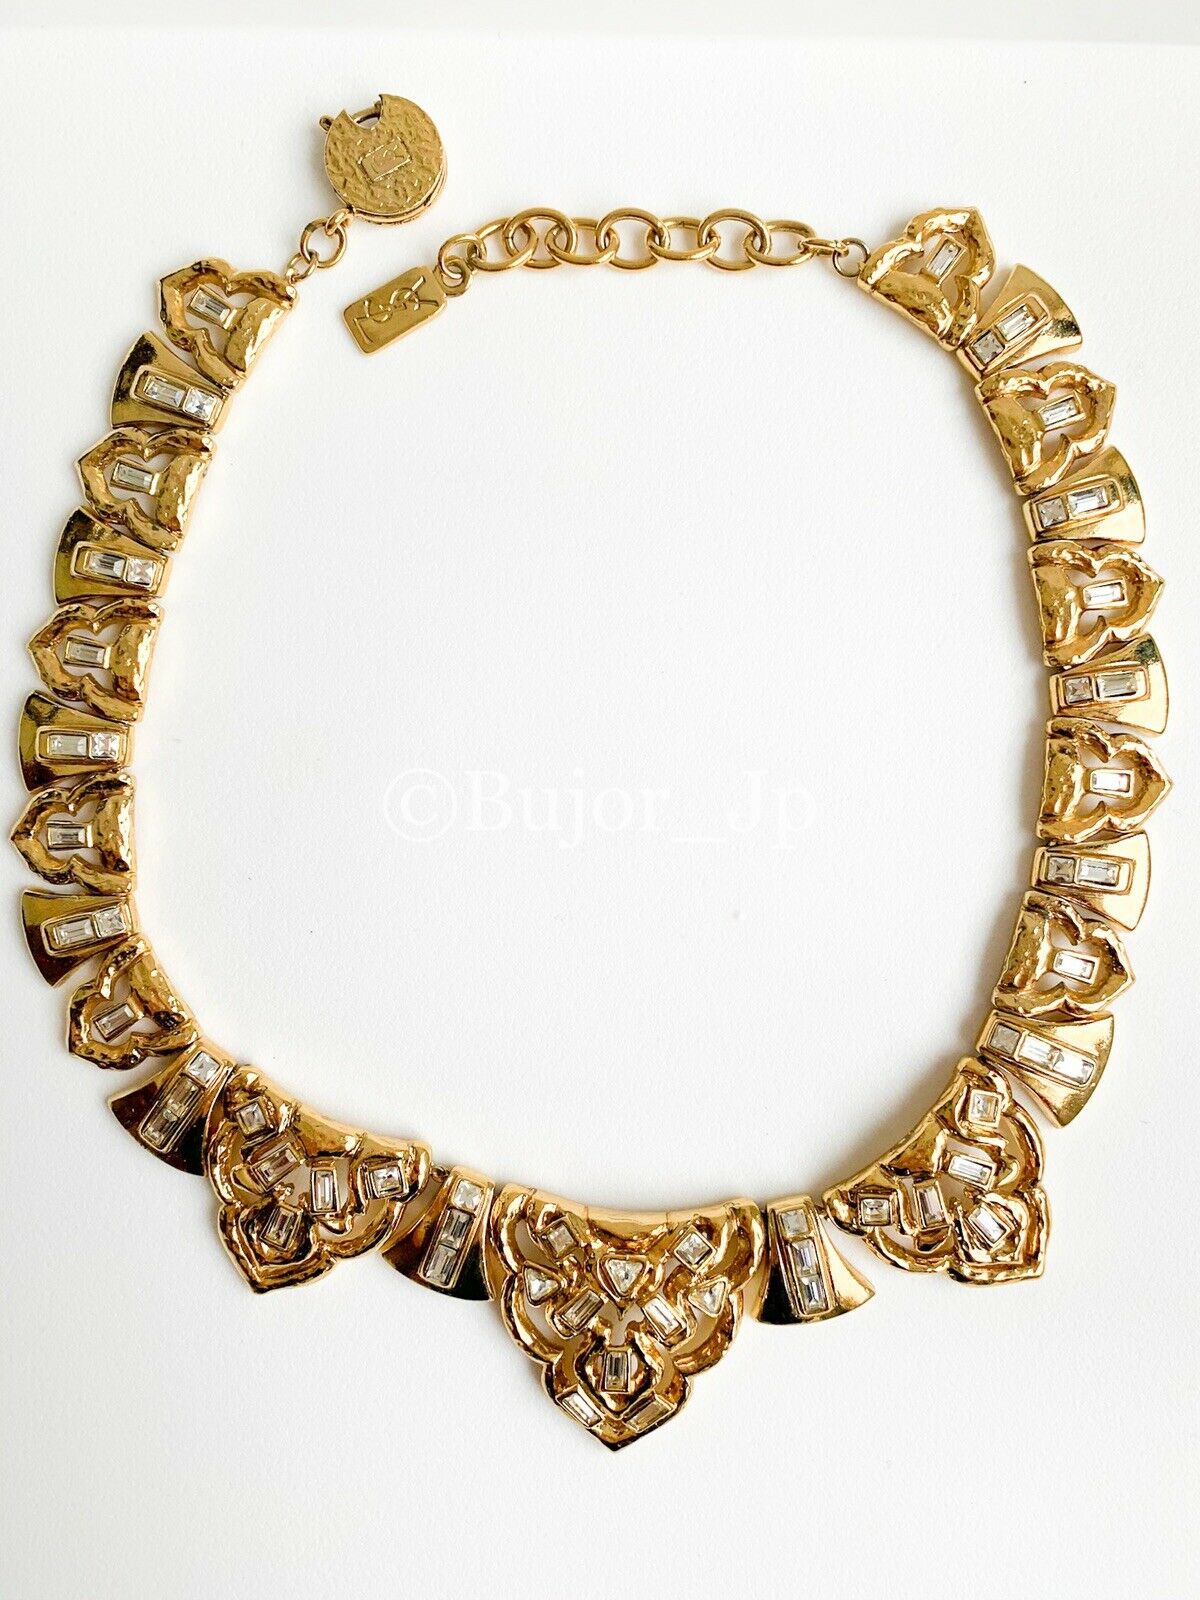 YSL Yves Saint Laurent  Necklace Princess style with different shapes of crystals